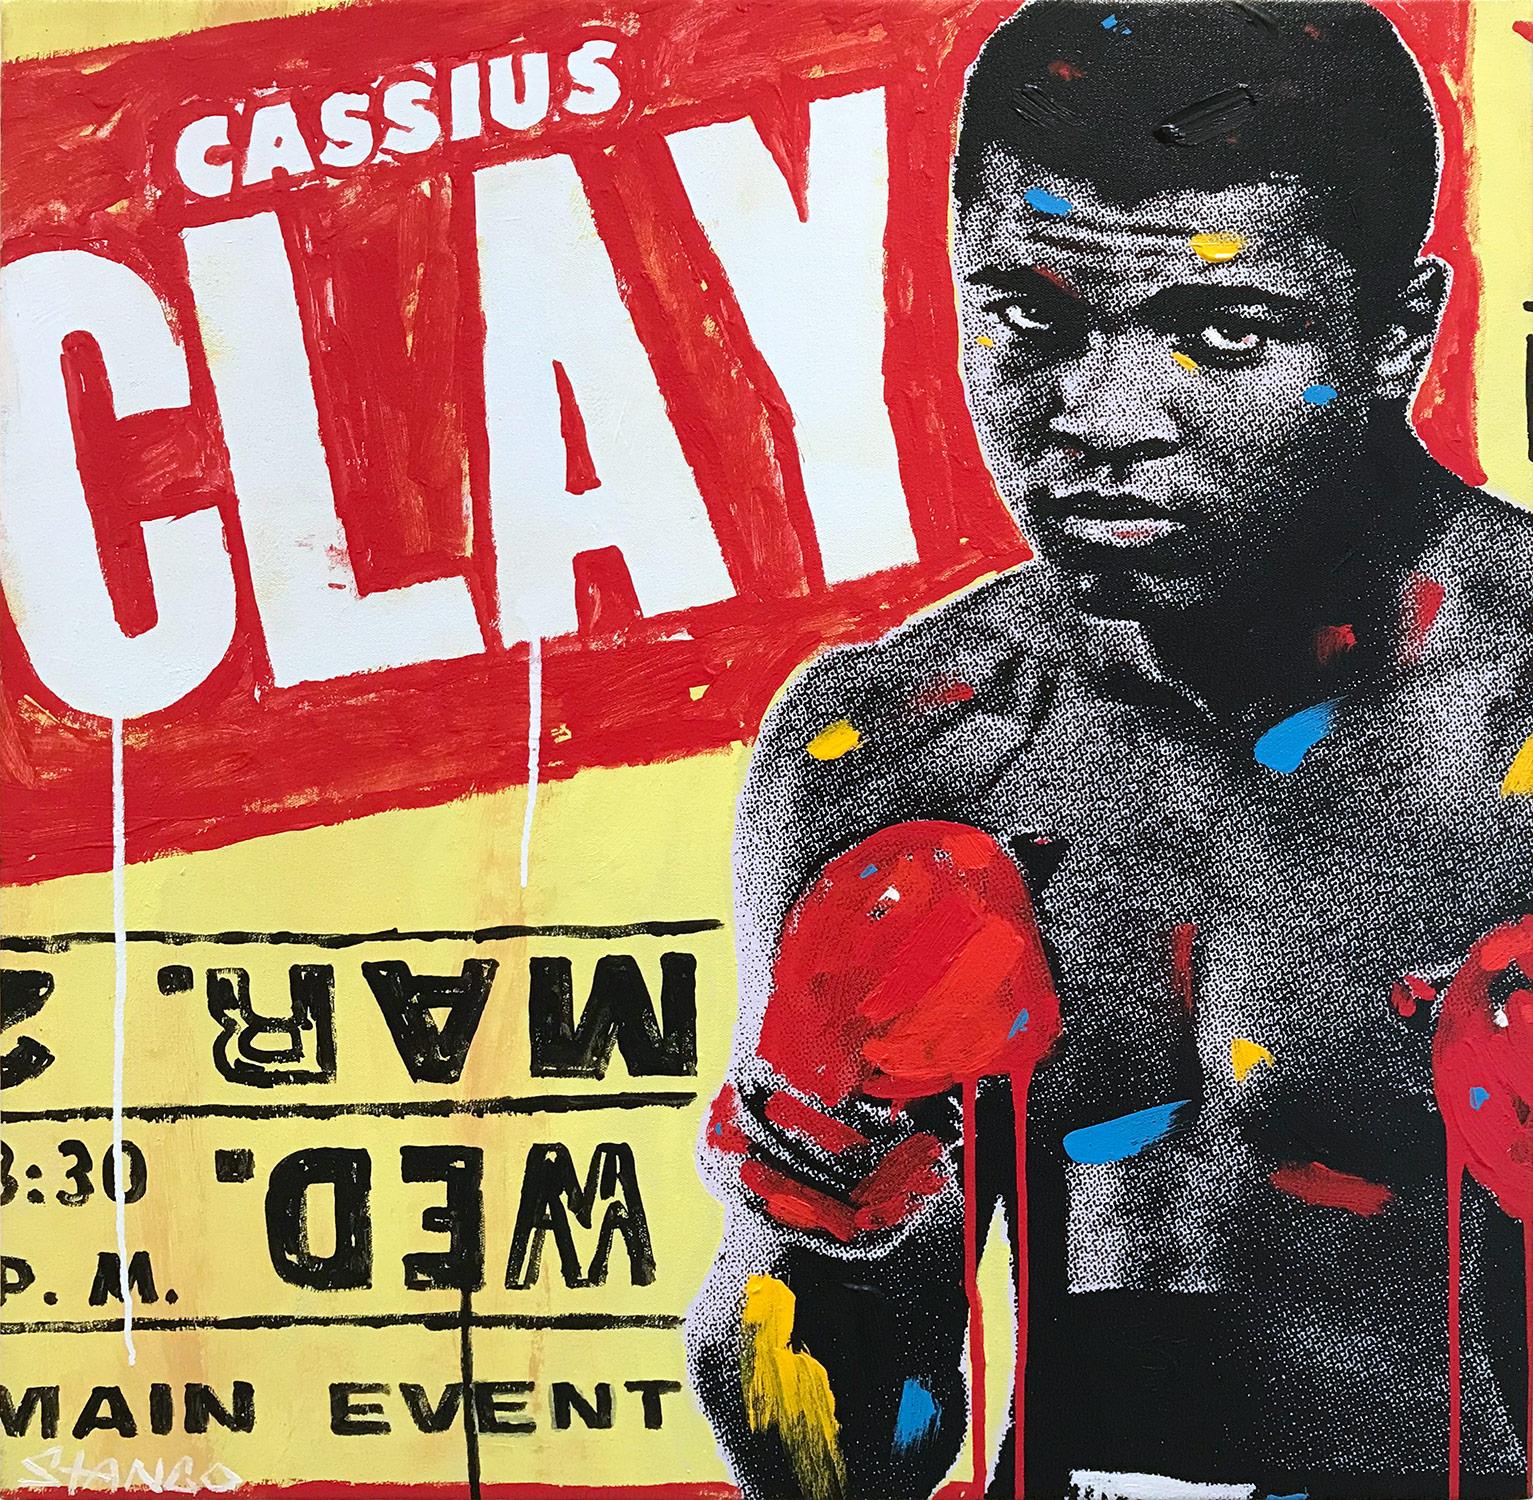 "Cassius Clay" Muhammad Ali Pop Art Painting on Canvas Red & Yellow Background